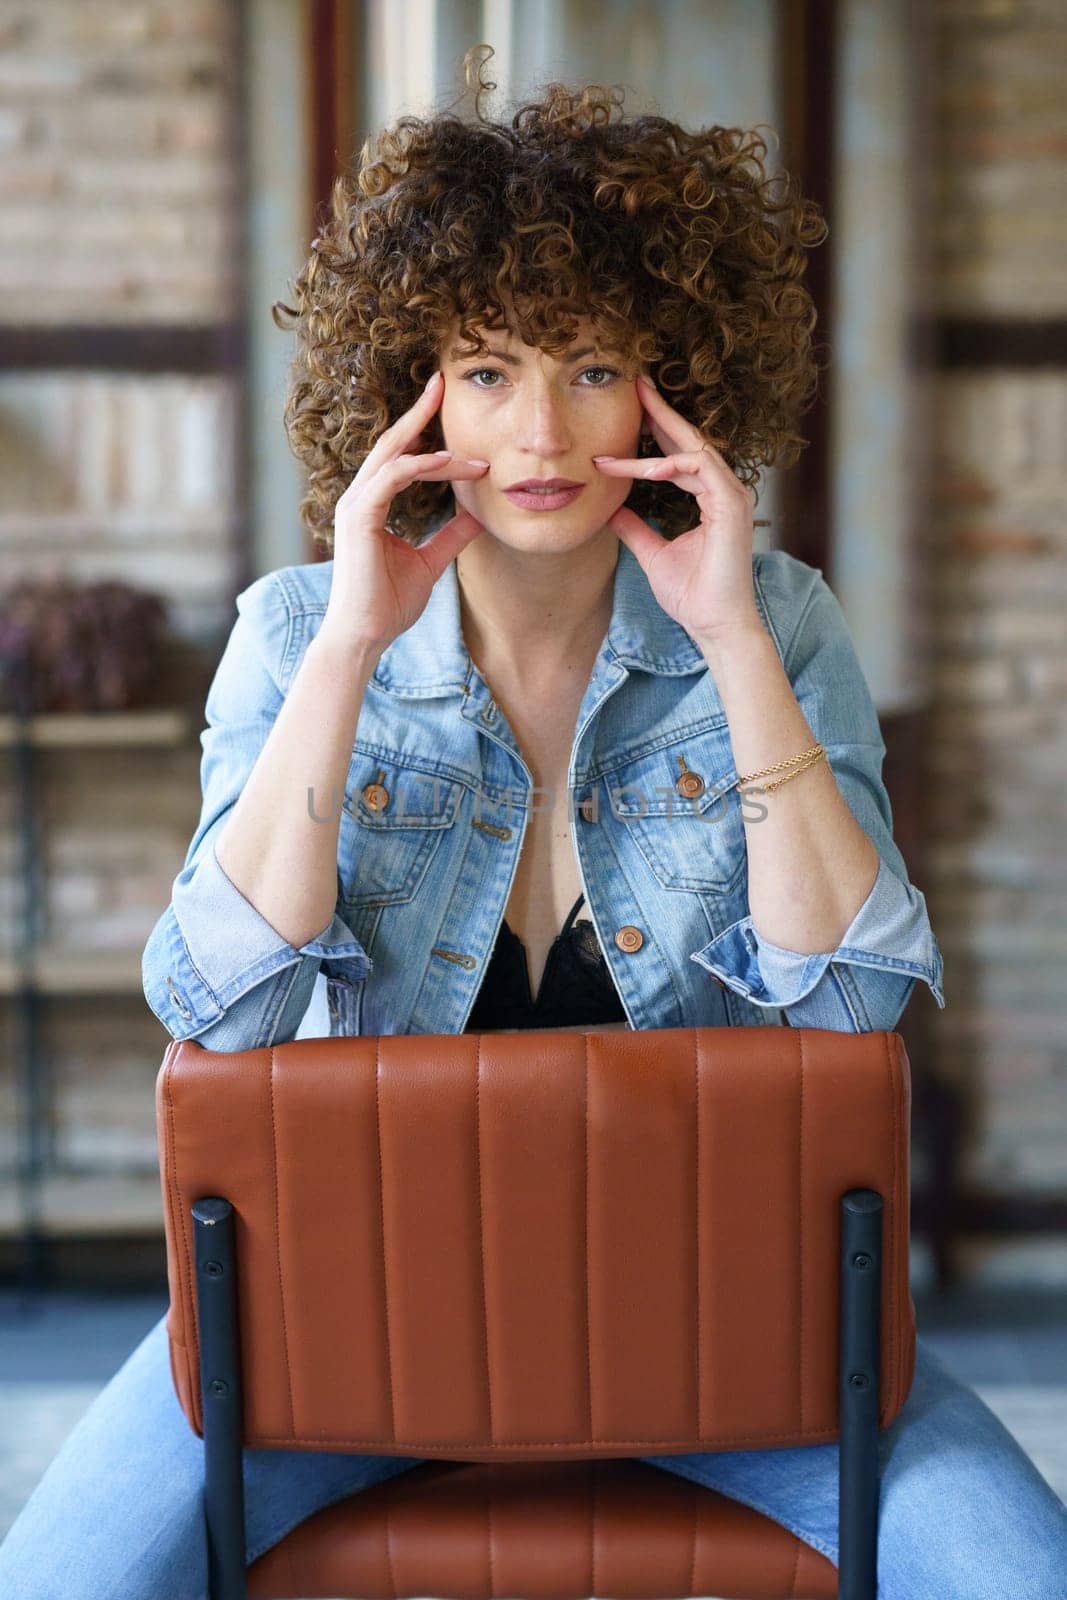 Serious young female with curly hair in denim jacket and jeans sitting on leather chair in room against brick wall while touching face